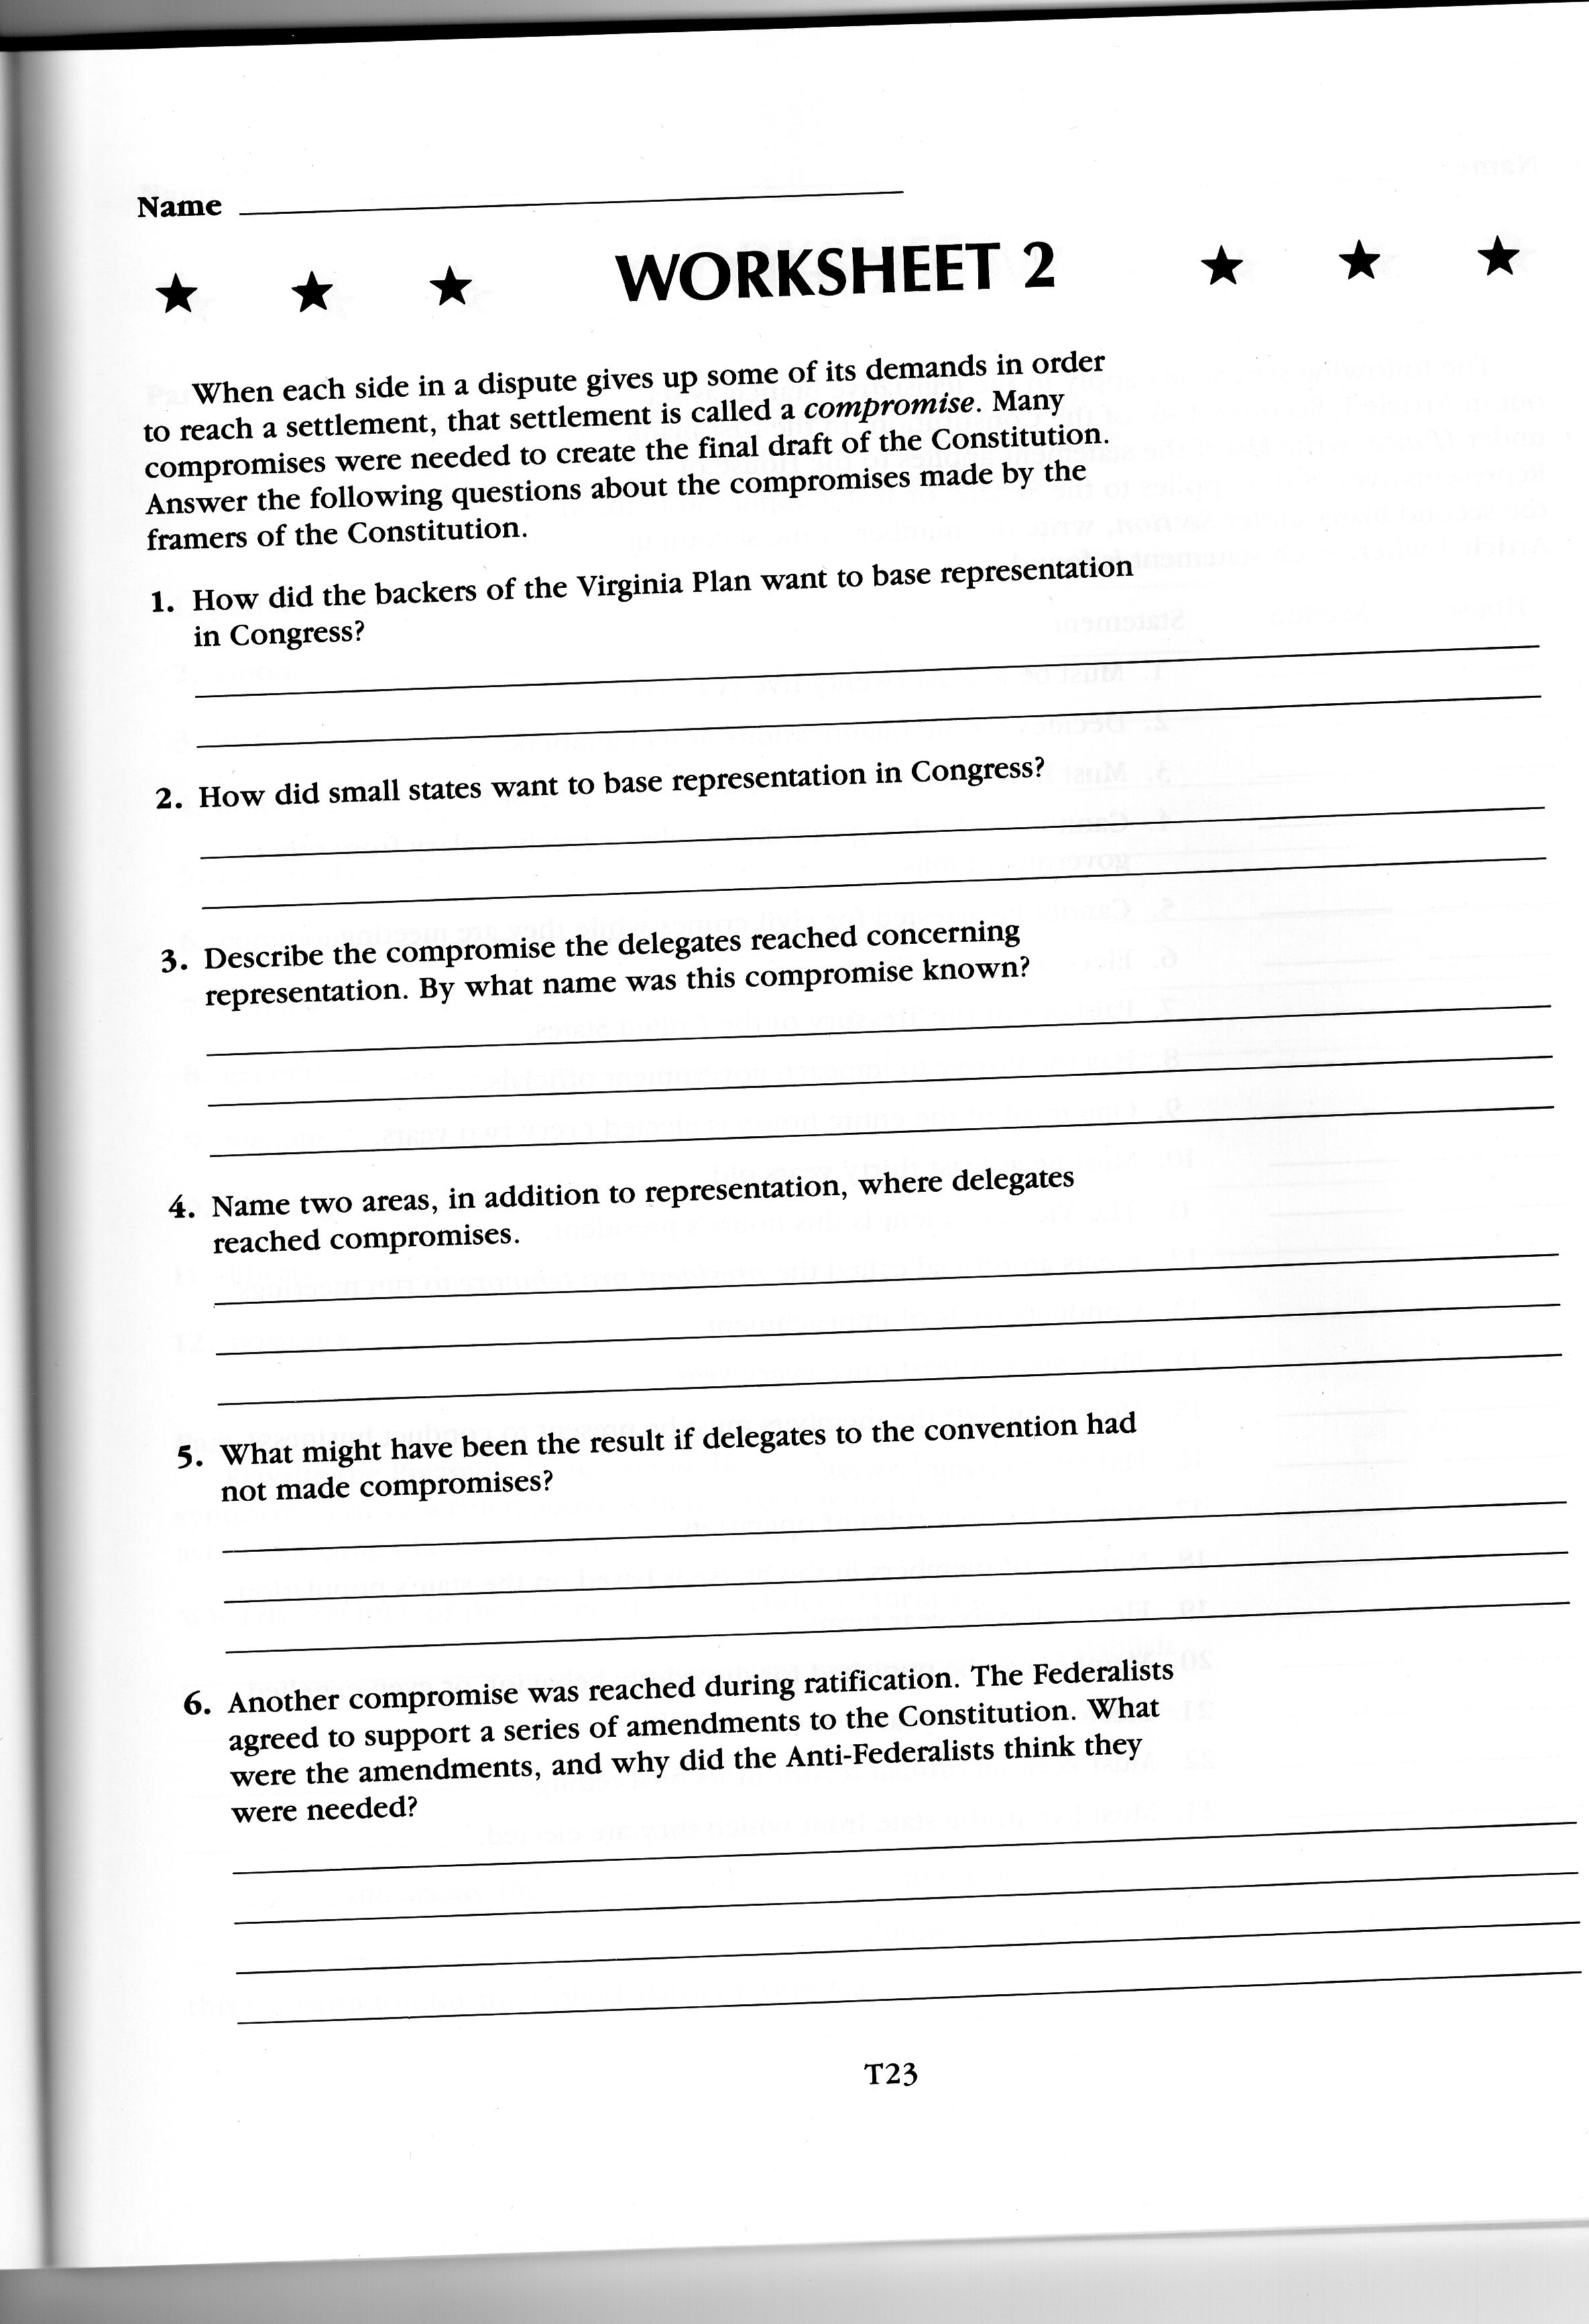 Foundations - Ms. Hawkins Social Studies Intended For Bill Of Rights Worksheet Answers